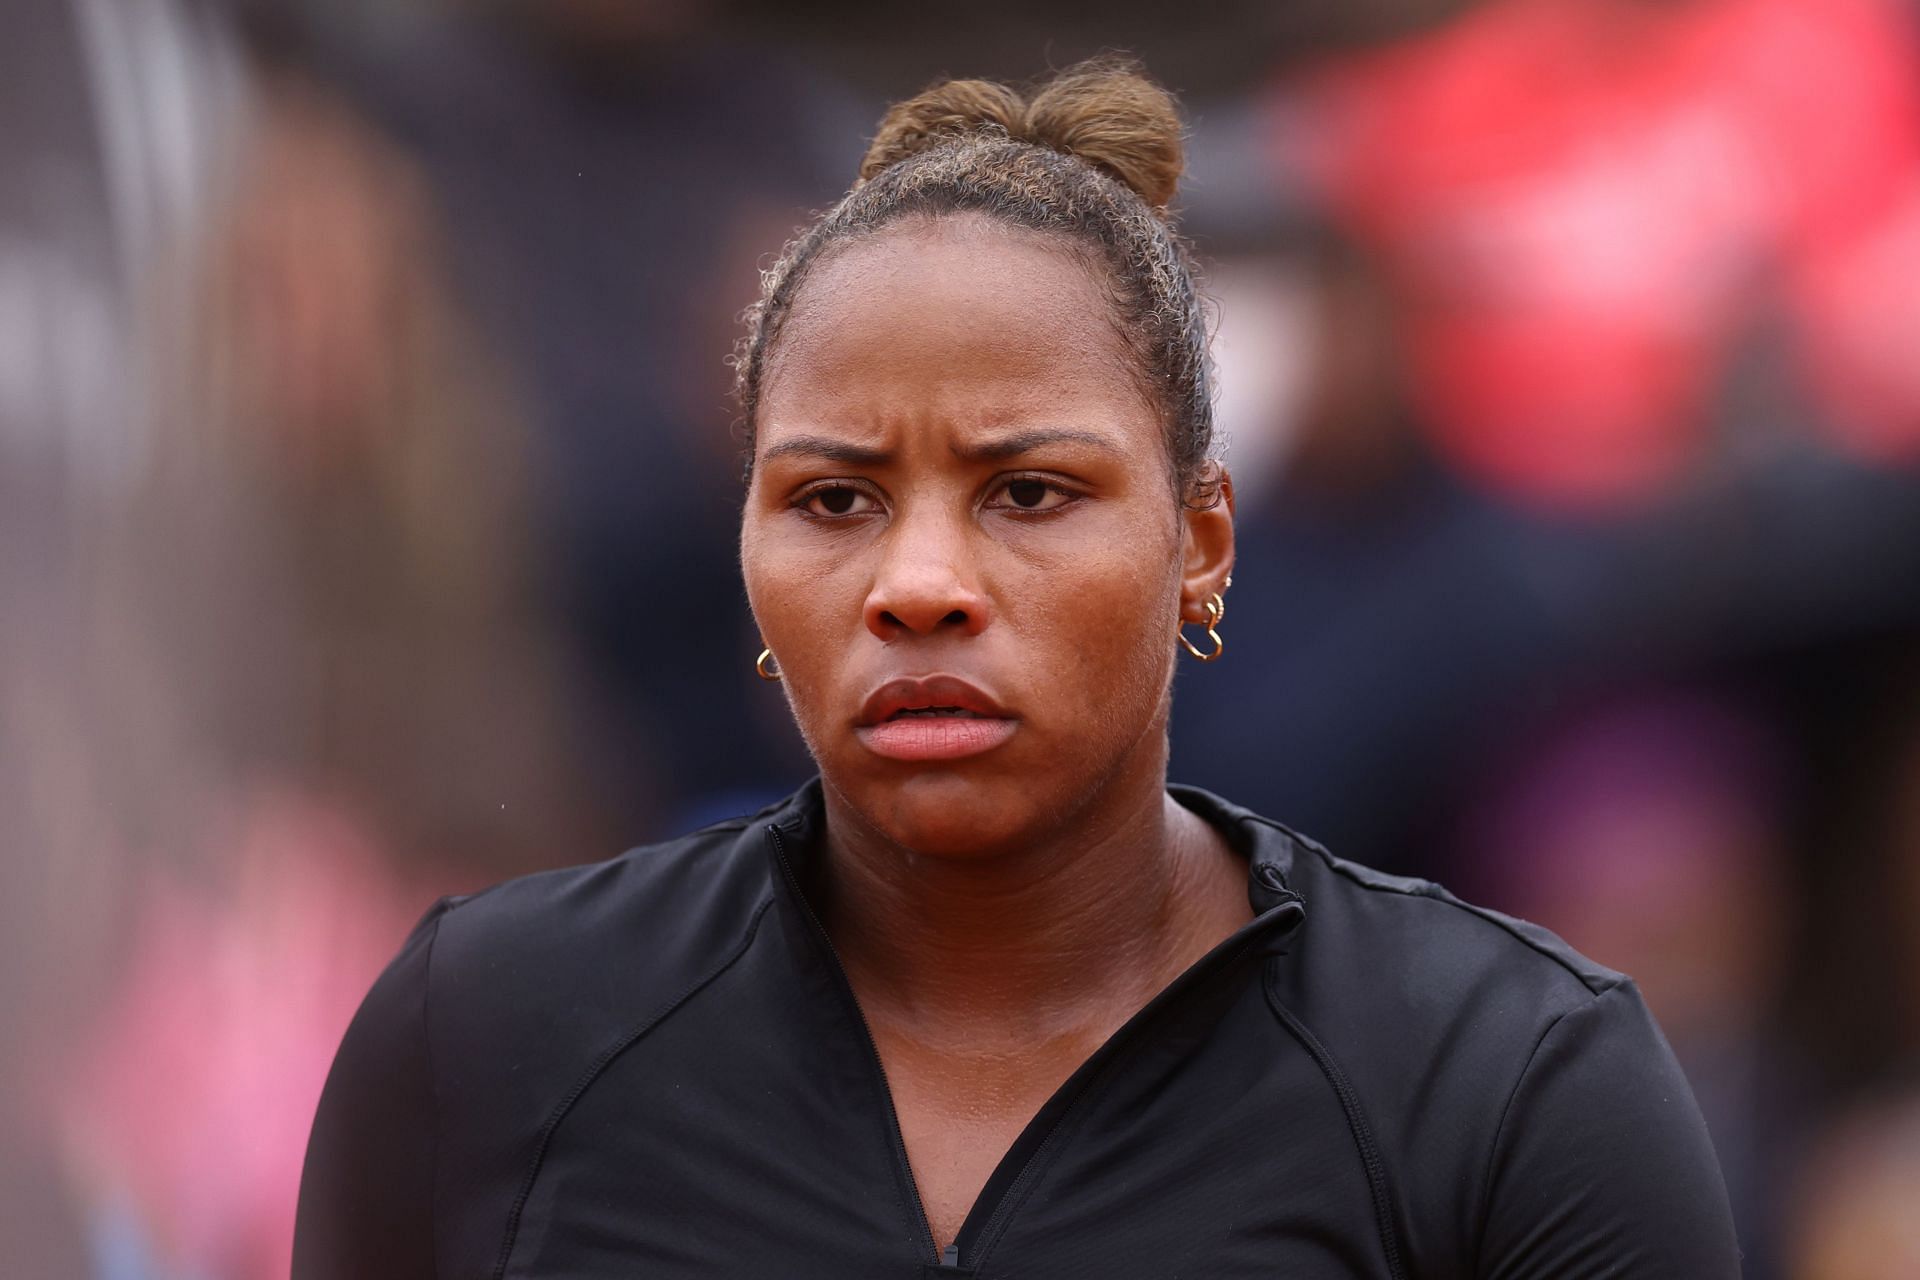 Taylor Townsend is currently ranked World No. 7 in the doubles.